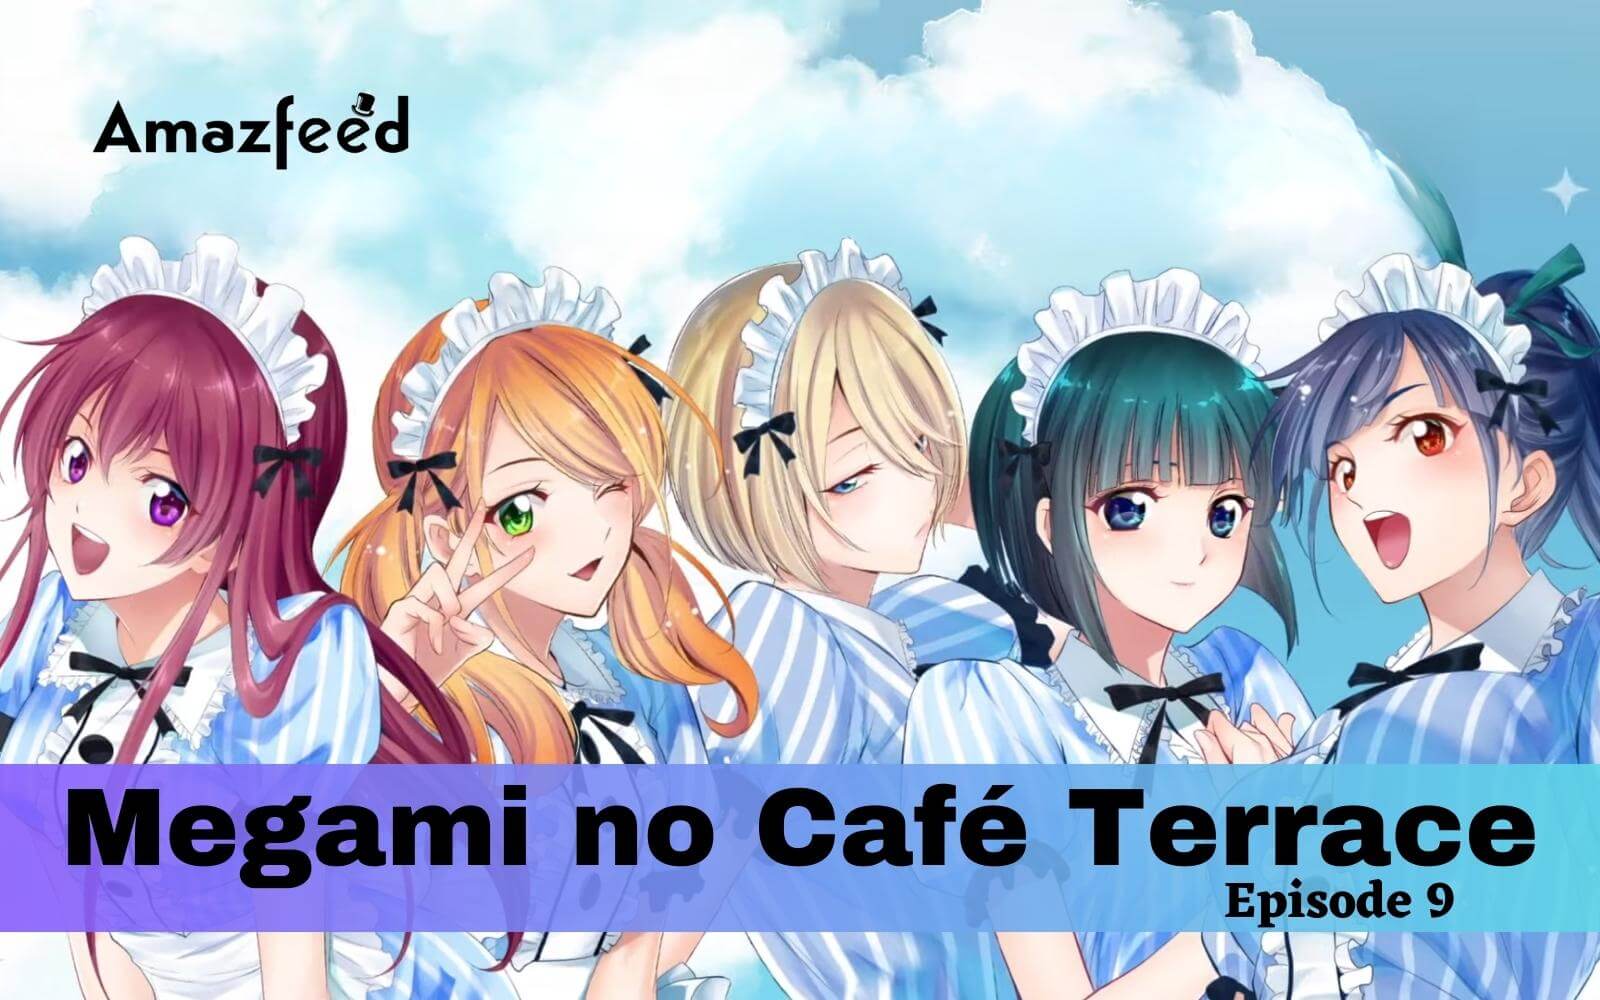 Megami no Cafe Terrace • The Café Terrace and Its Goddesses - Episode 8  discussion : r/anime